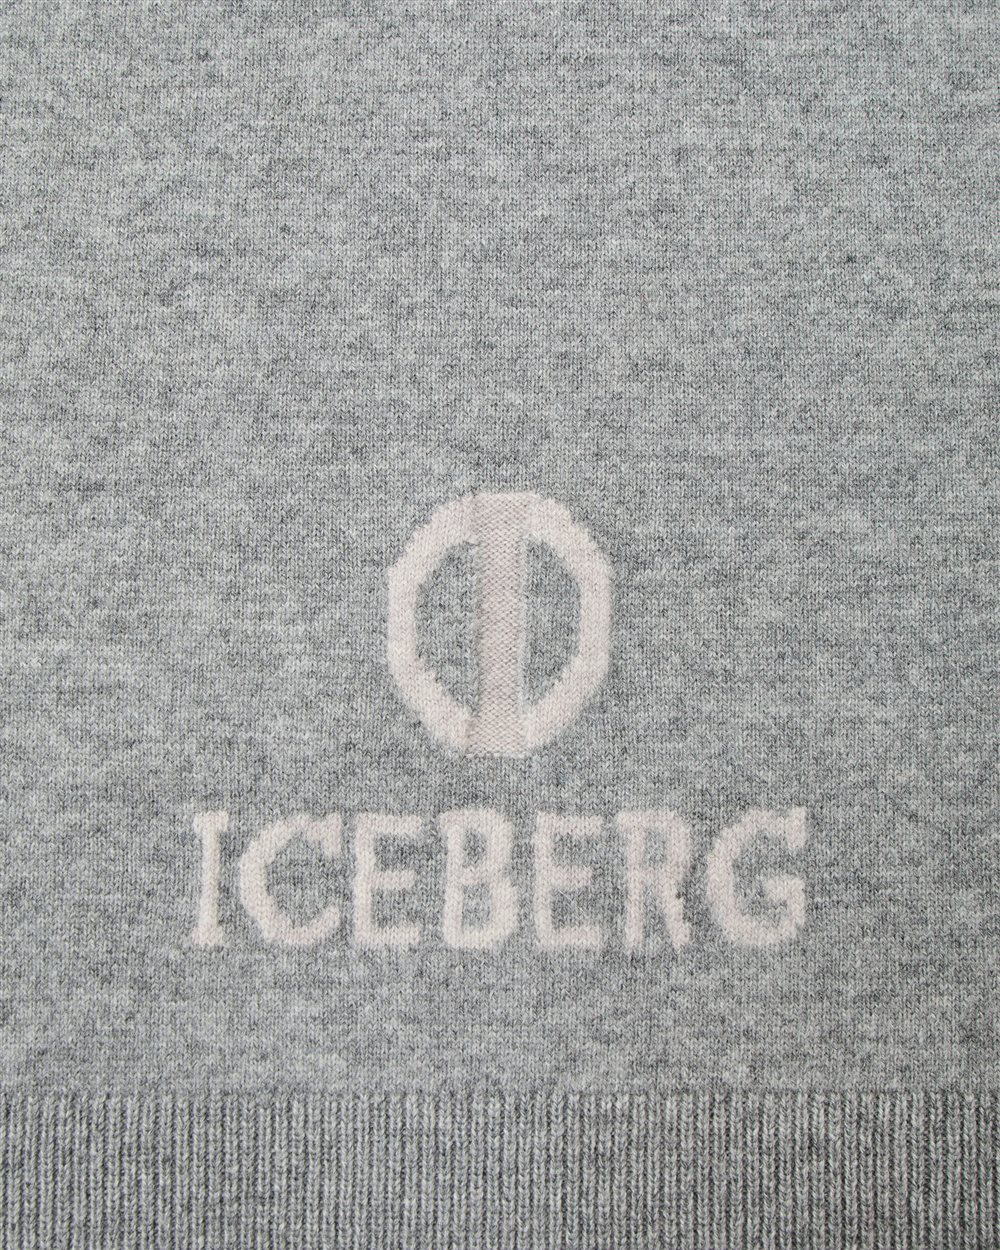 Scarf with logo - Iceberg - Official Website